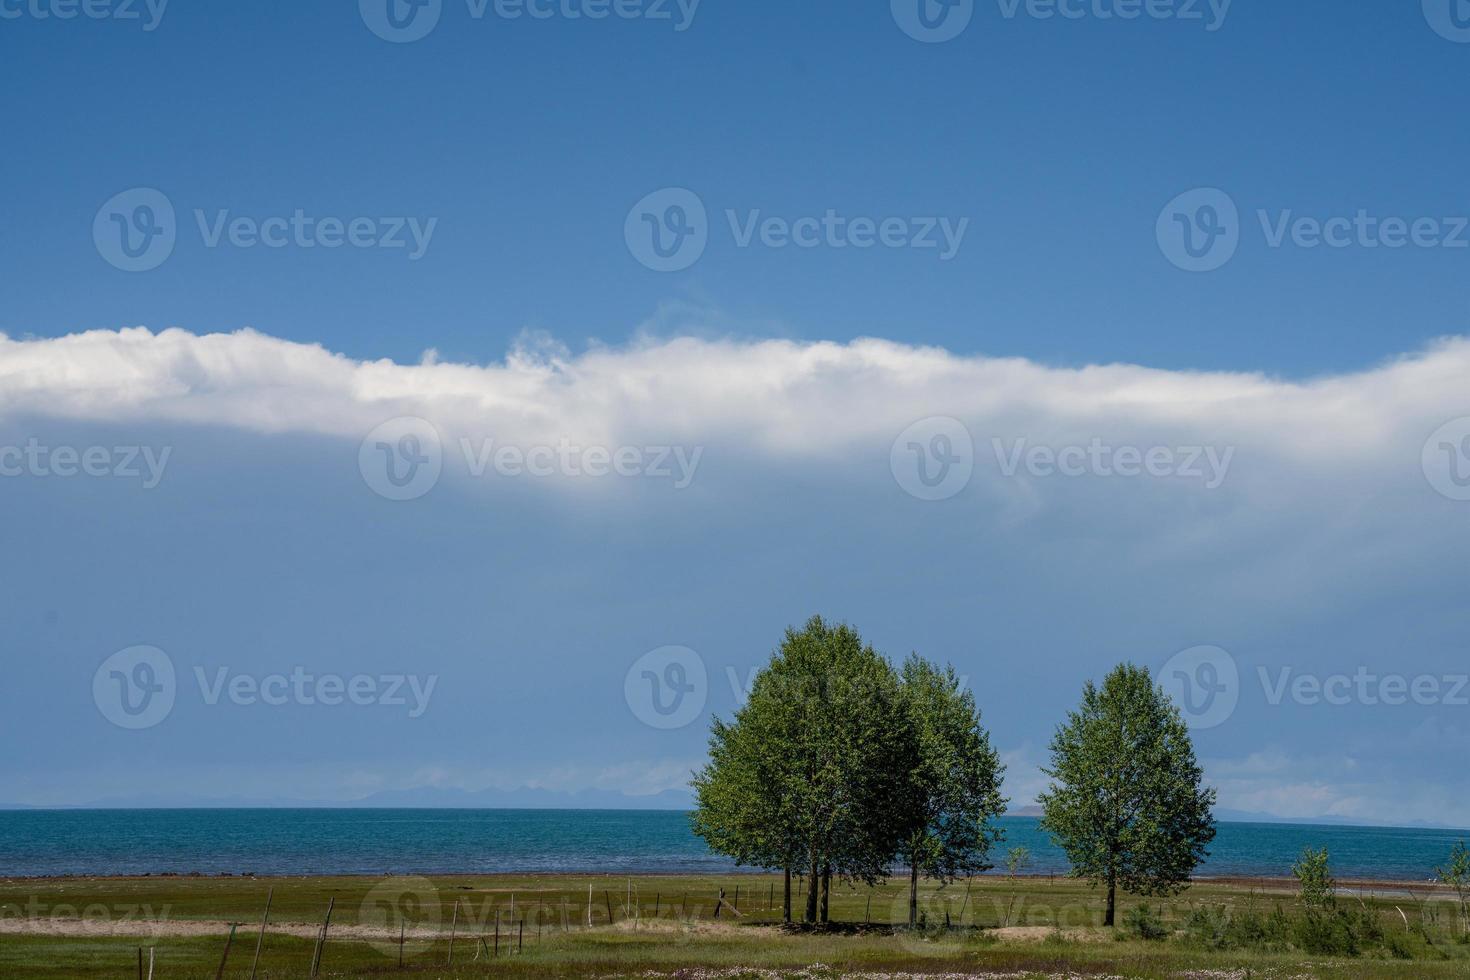 There are some prominent trees on the grassland under the blue sky and white clouds by the Qinghai Lake photo